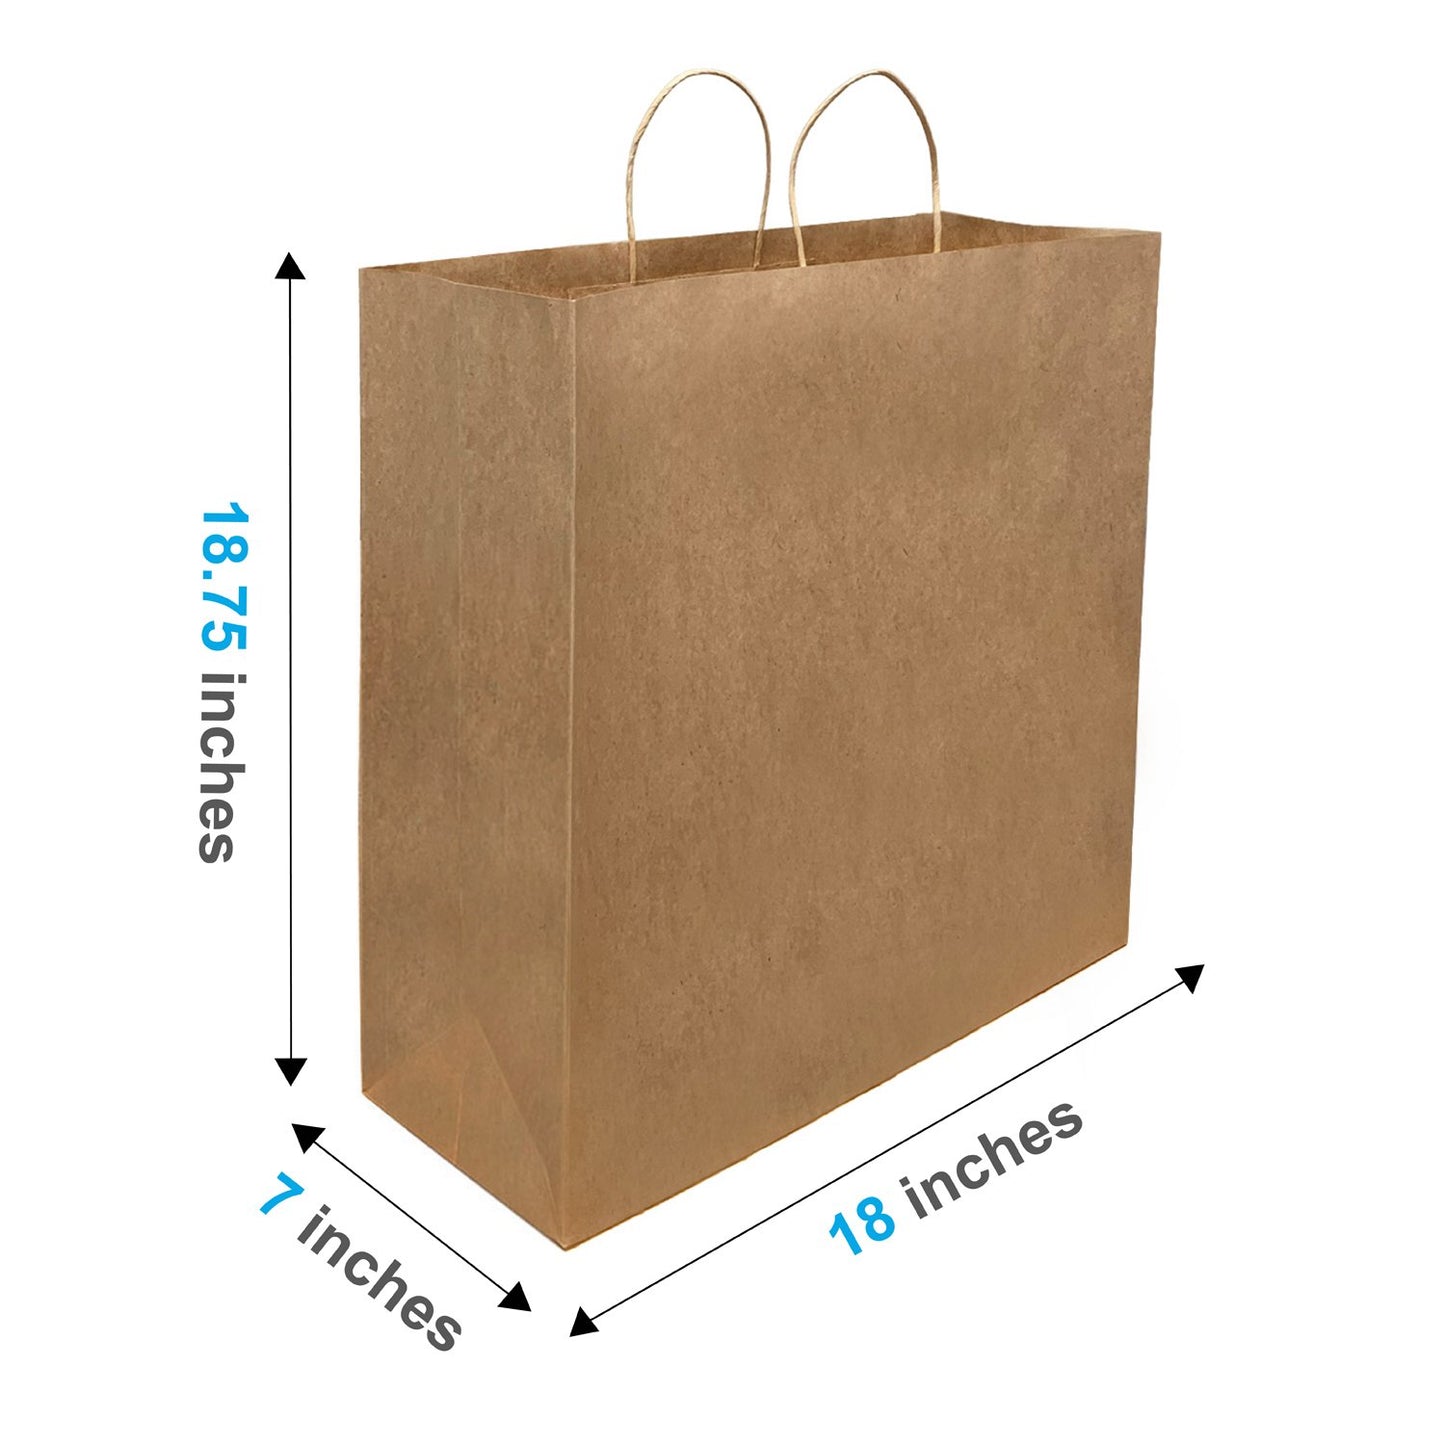 200 Pcs, Jumbo, 18x7x18.75 inches, Kraft Paper Bags, with Twisted Handles